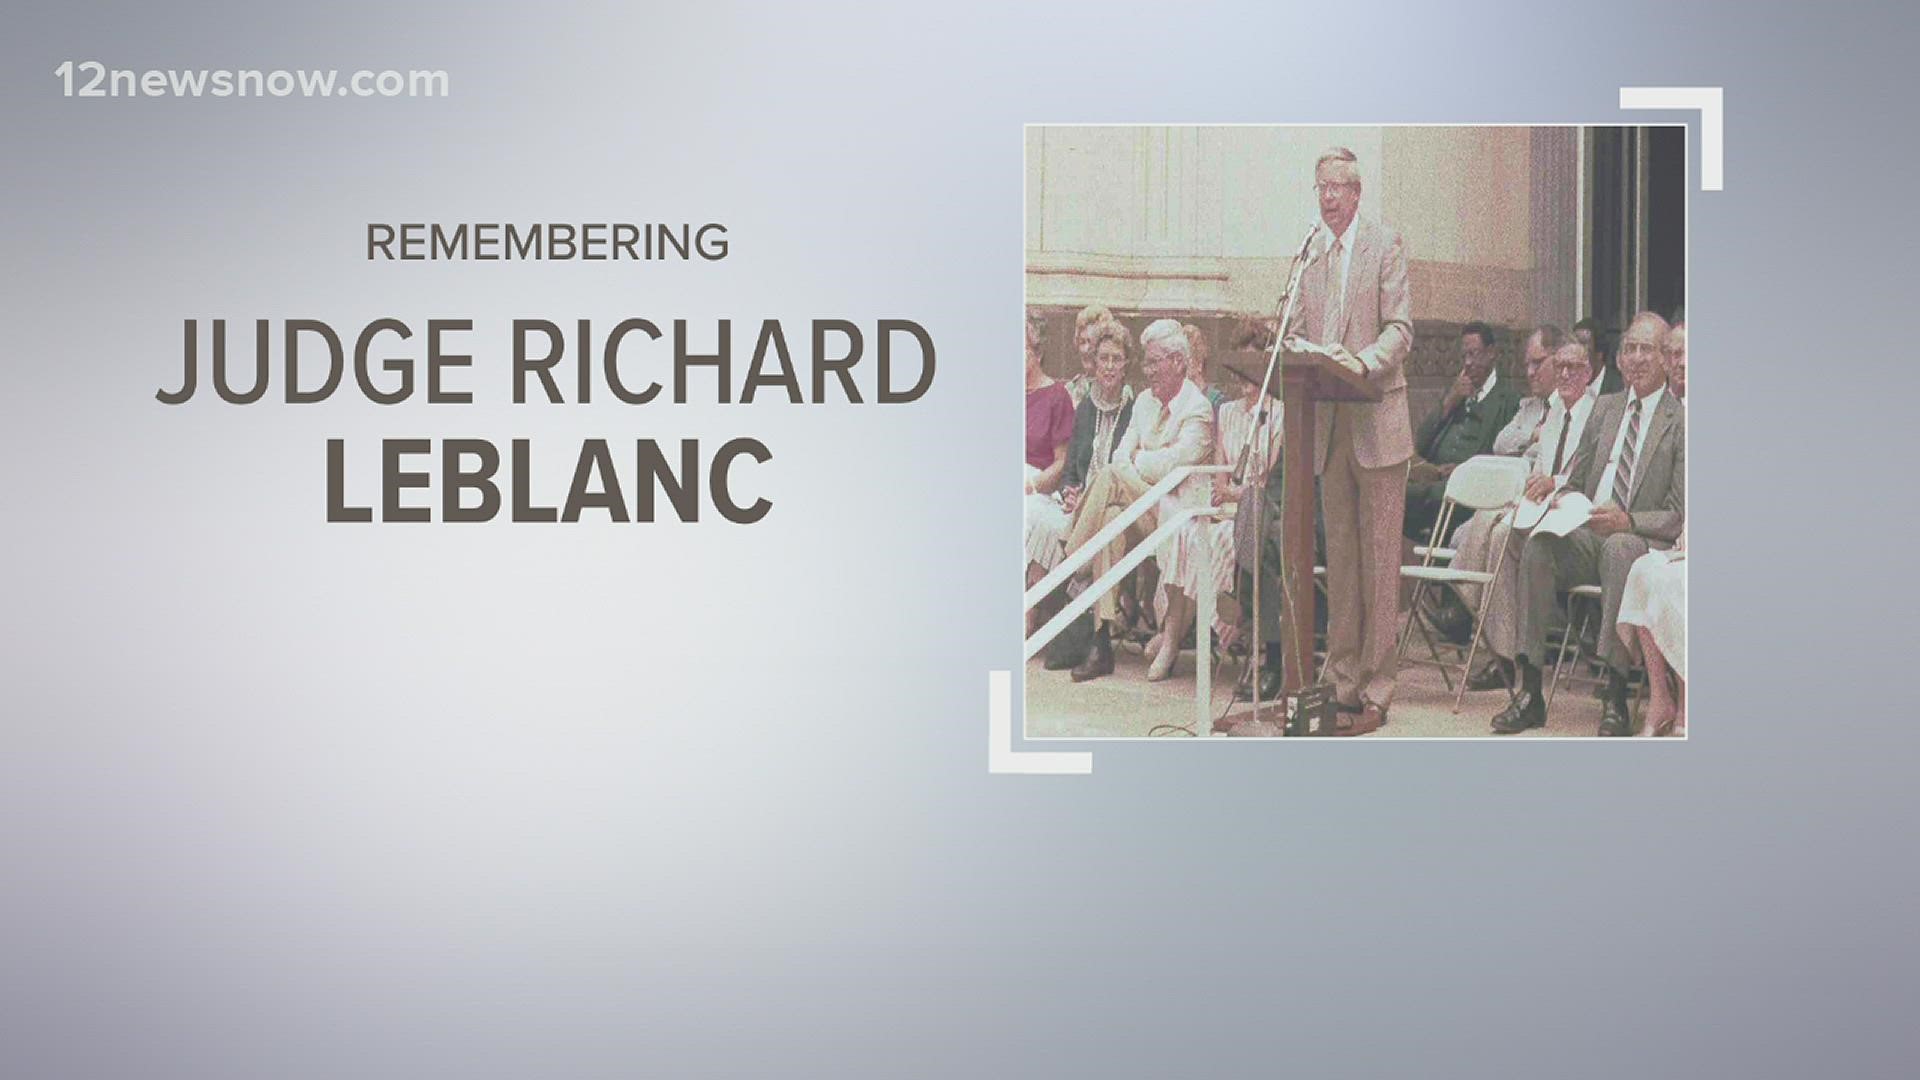 Friends, family and Southeast Texas elected officials are mourning the loss of former Jefferson County Judge Richard P. LeBlanc.